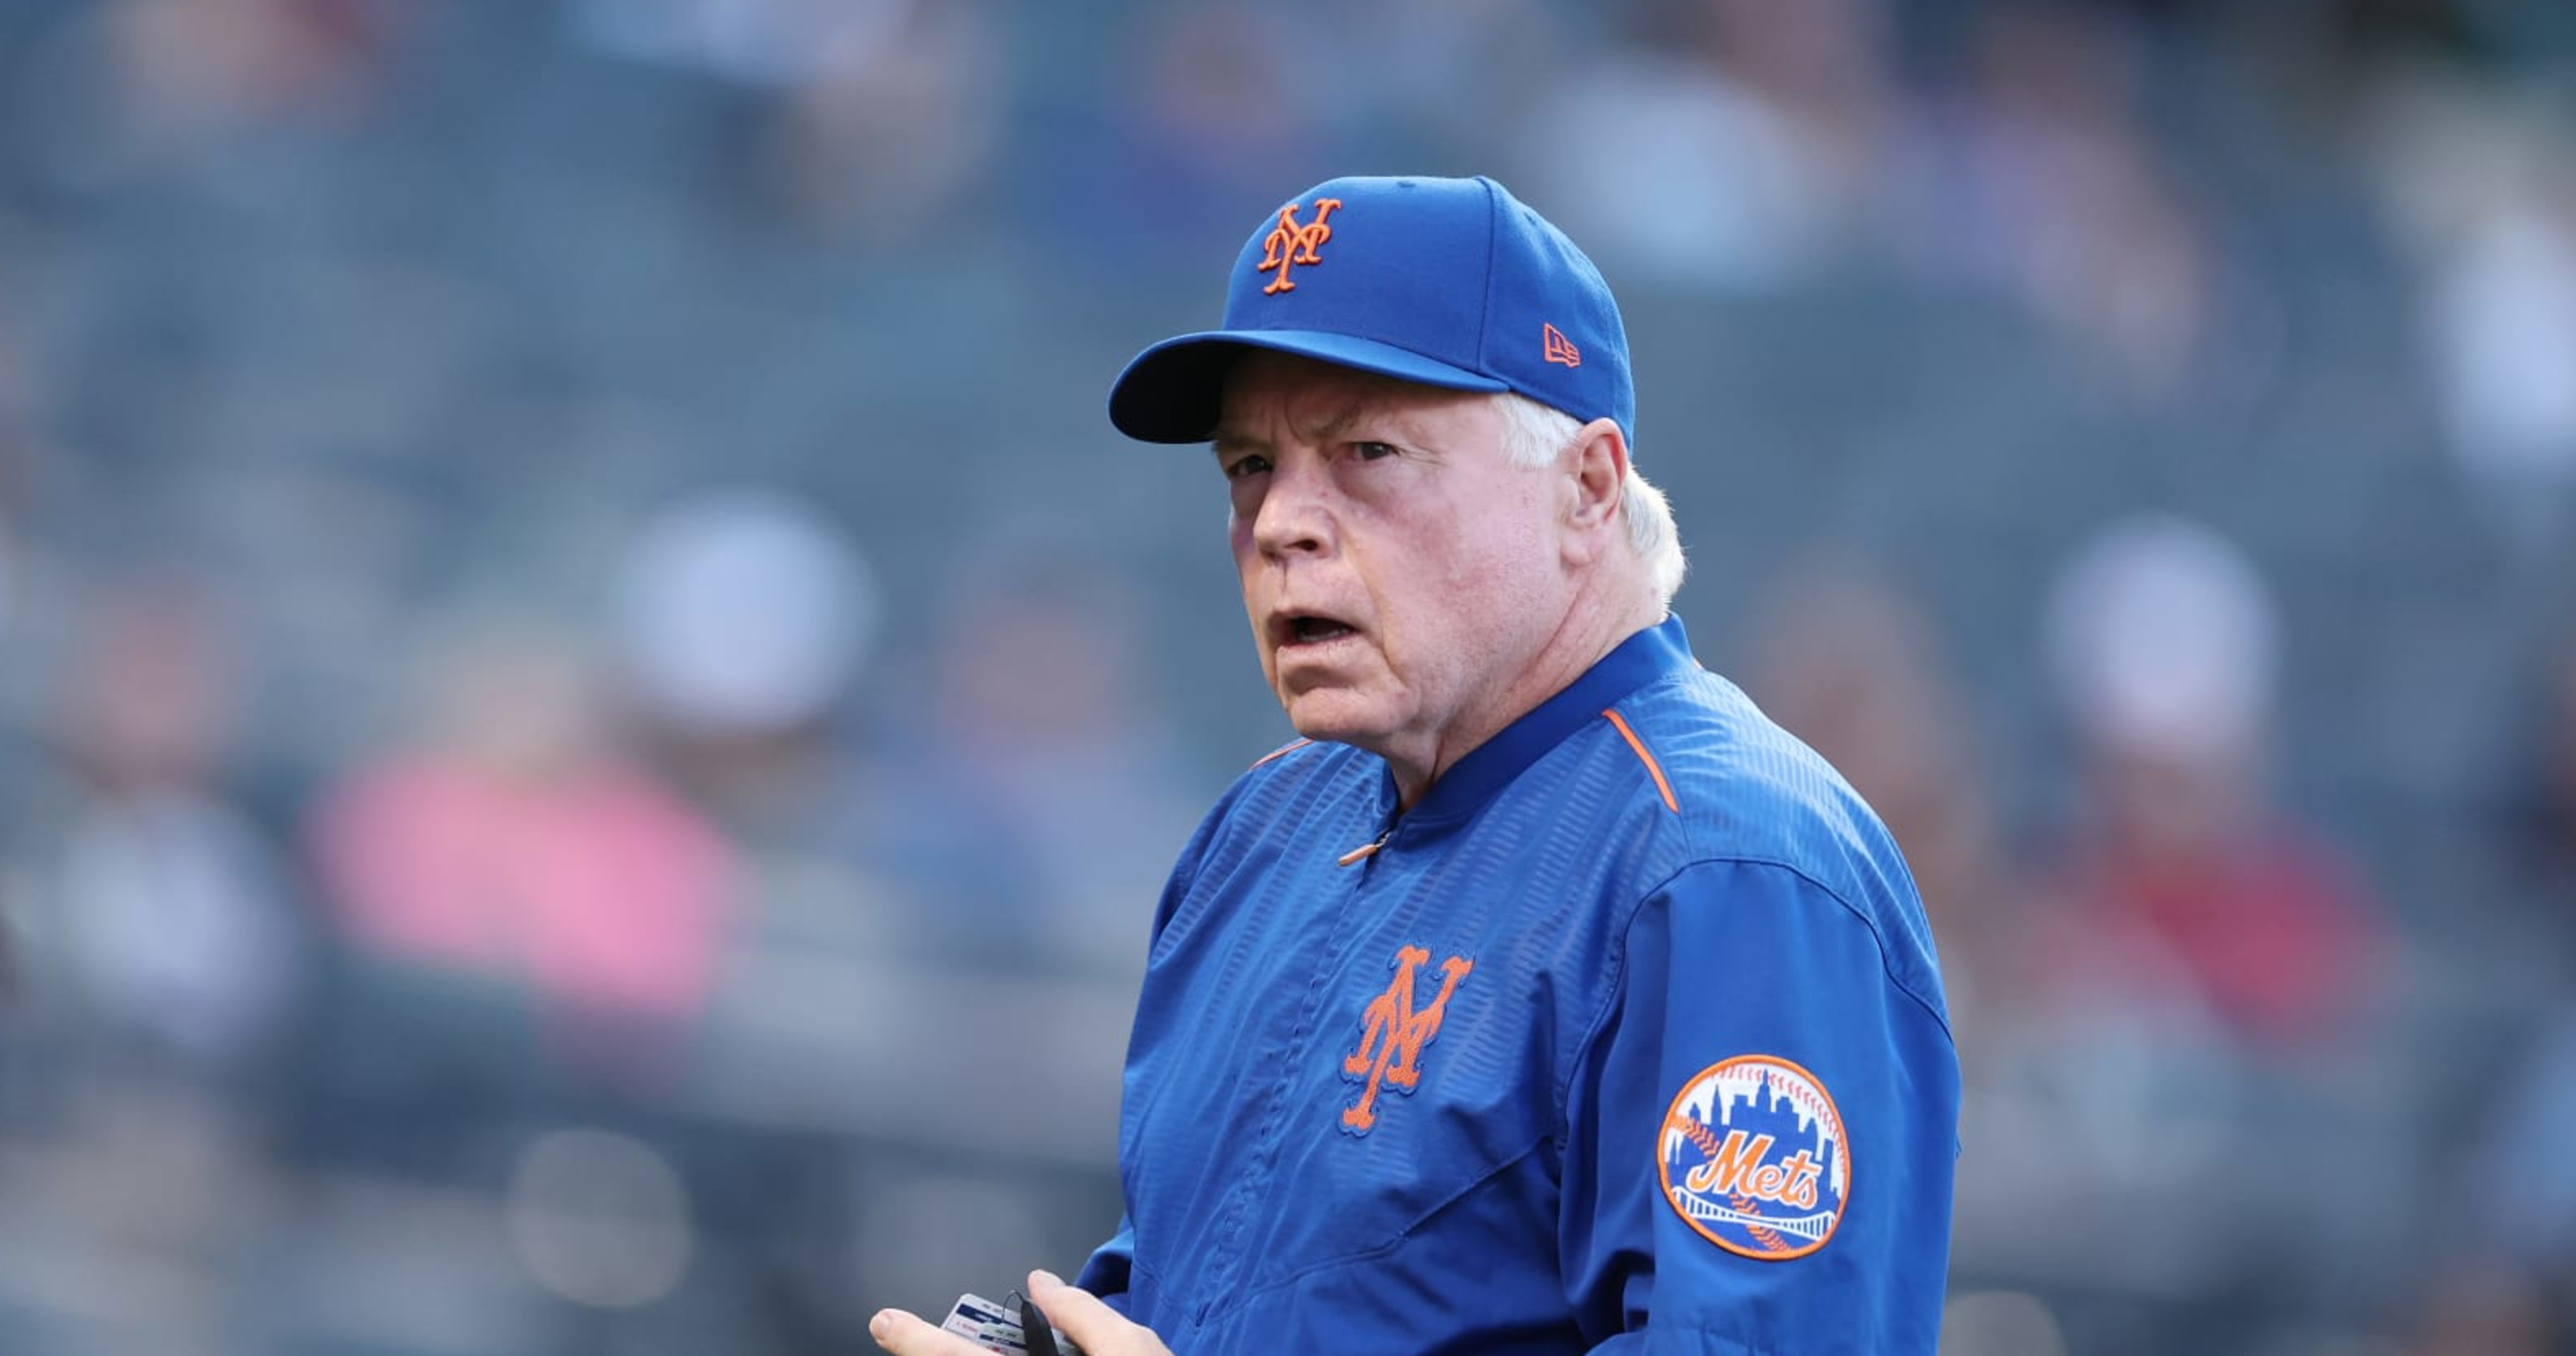 Buck Showalter, Manager of the New York Yankees, smiling during News  Photo - Getty Images